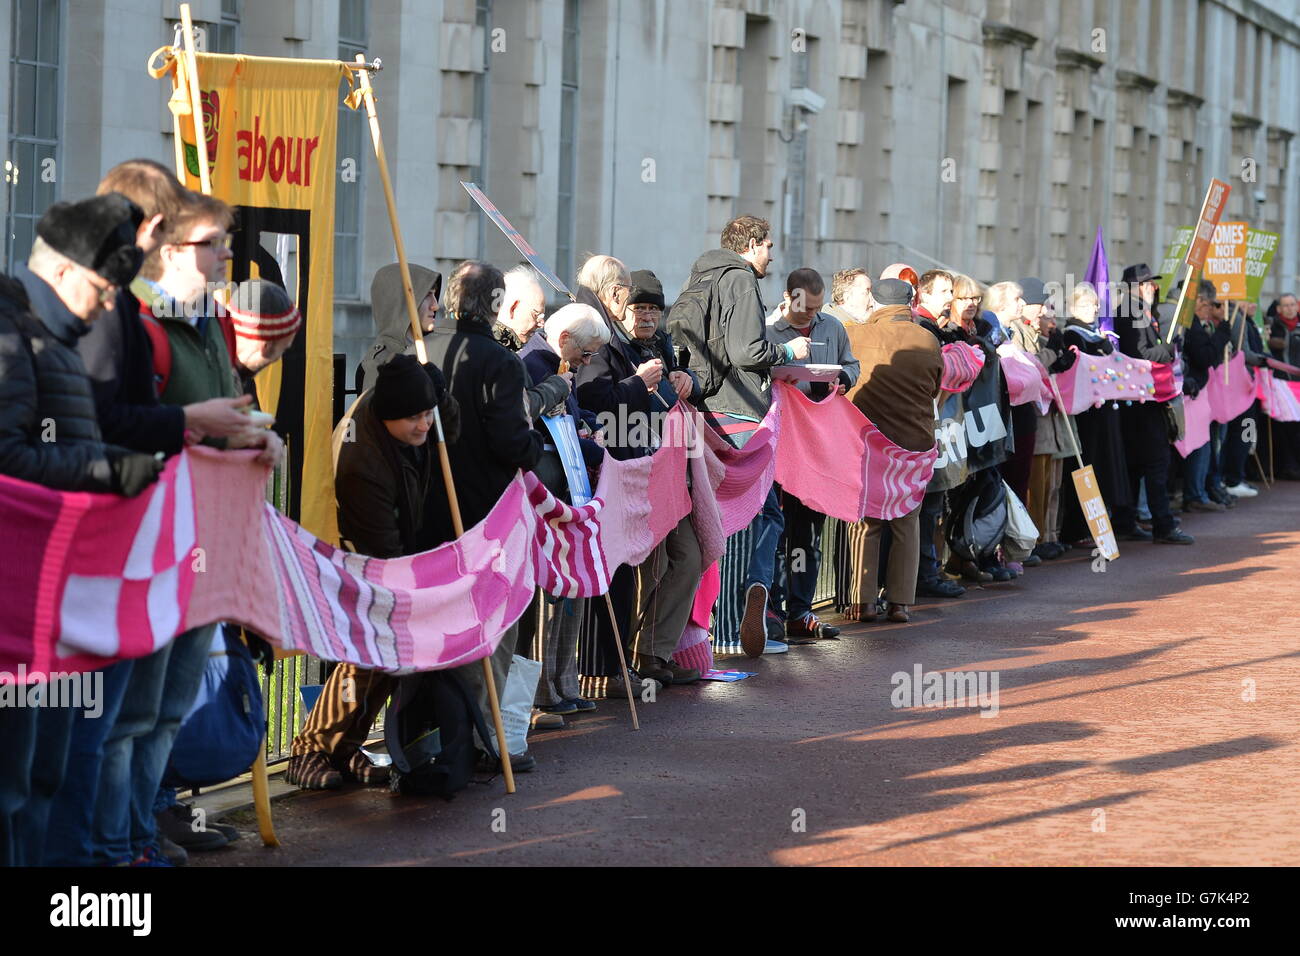 Protesters hold a scarf during a CND march against Trident nuclear missiles in London. PRESS ASSOCIATION Photo. Picture date: Saturday January 24, 2015. The pink-coloured scarf, knitted by people across the world, will encircle the Ministry of Defence building in central London as part of the demonstration. See PA story POLITICS CND. Photo credit should read: John Stillwell/PA Wire Stock Photo